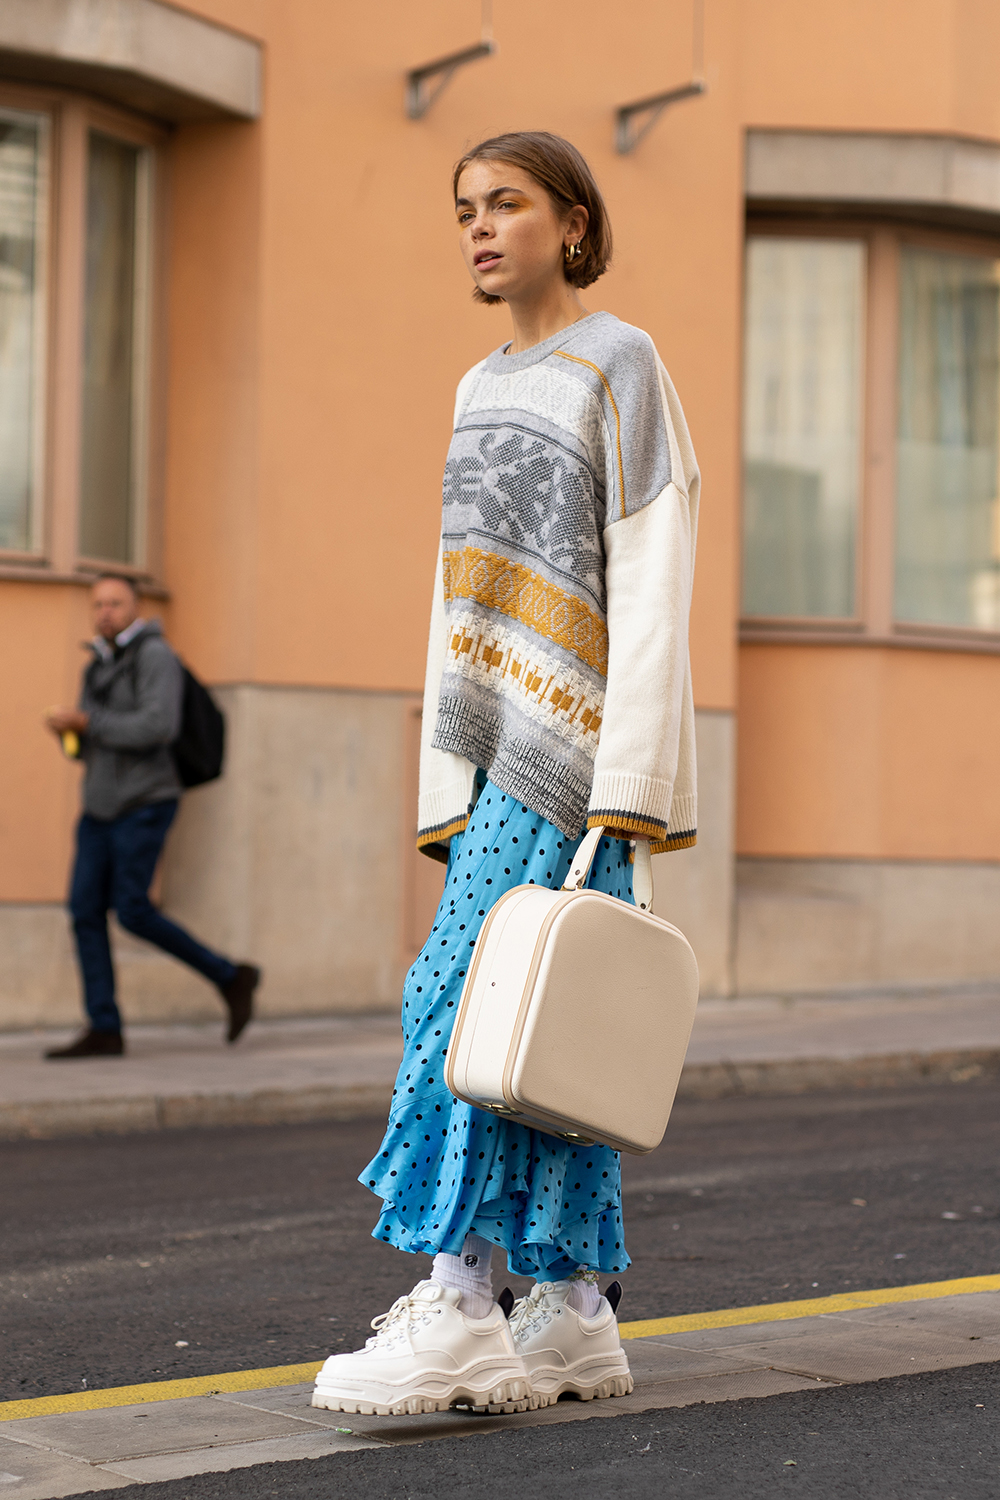 STOCKHOLM, SWEDEN - AUGUST 29: A guest is seen on the street during Fashion Week Stockholm SS19 wearing a grey/gold pattern sweater with blue skirt, white sneakers and vintage jewelry box bag on August 29, 2018 in Stockholm, Sweden. (Photo by Matthew Sperzel/Getty Images)